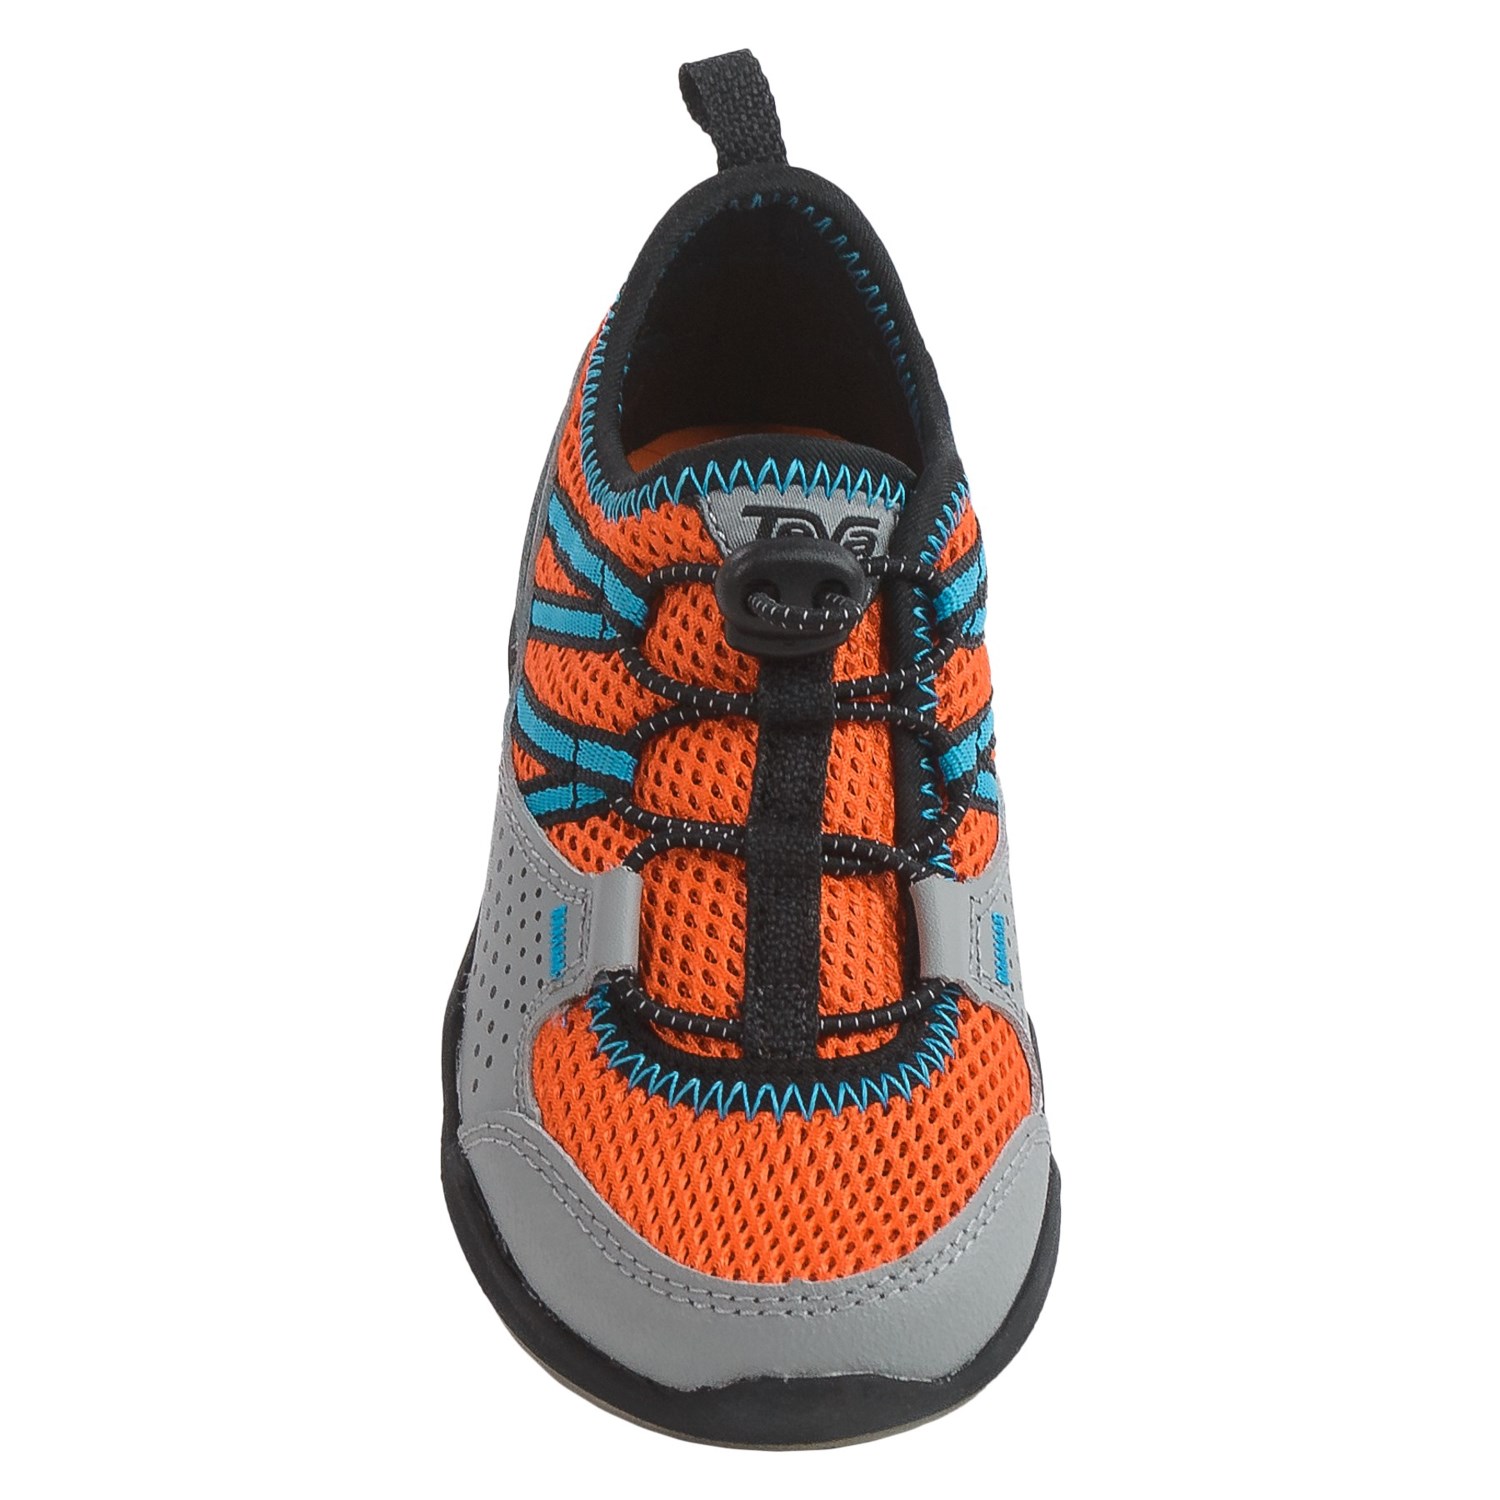 Teva Scamper Trail and Water Shoes (For Little Kids) - Save 72%